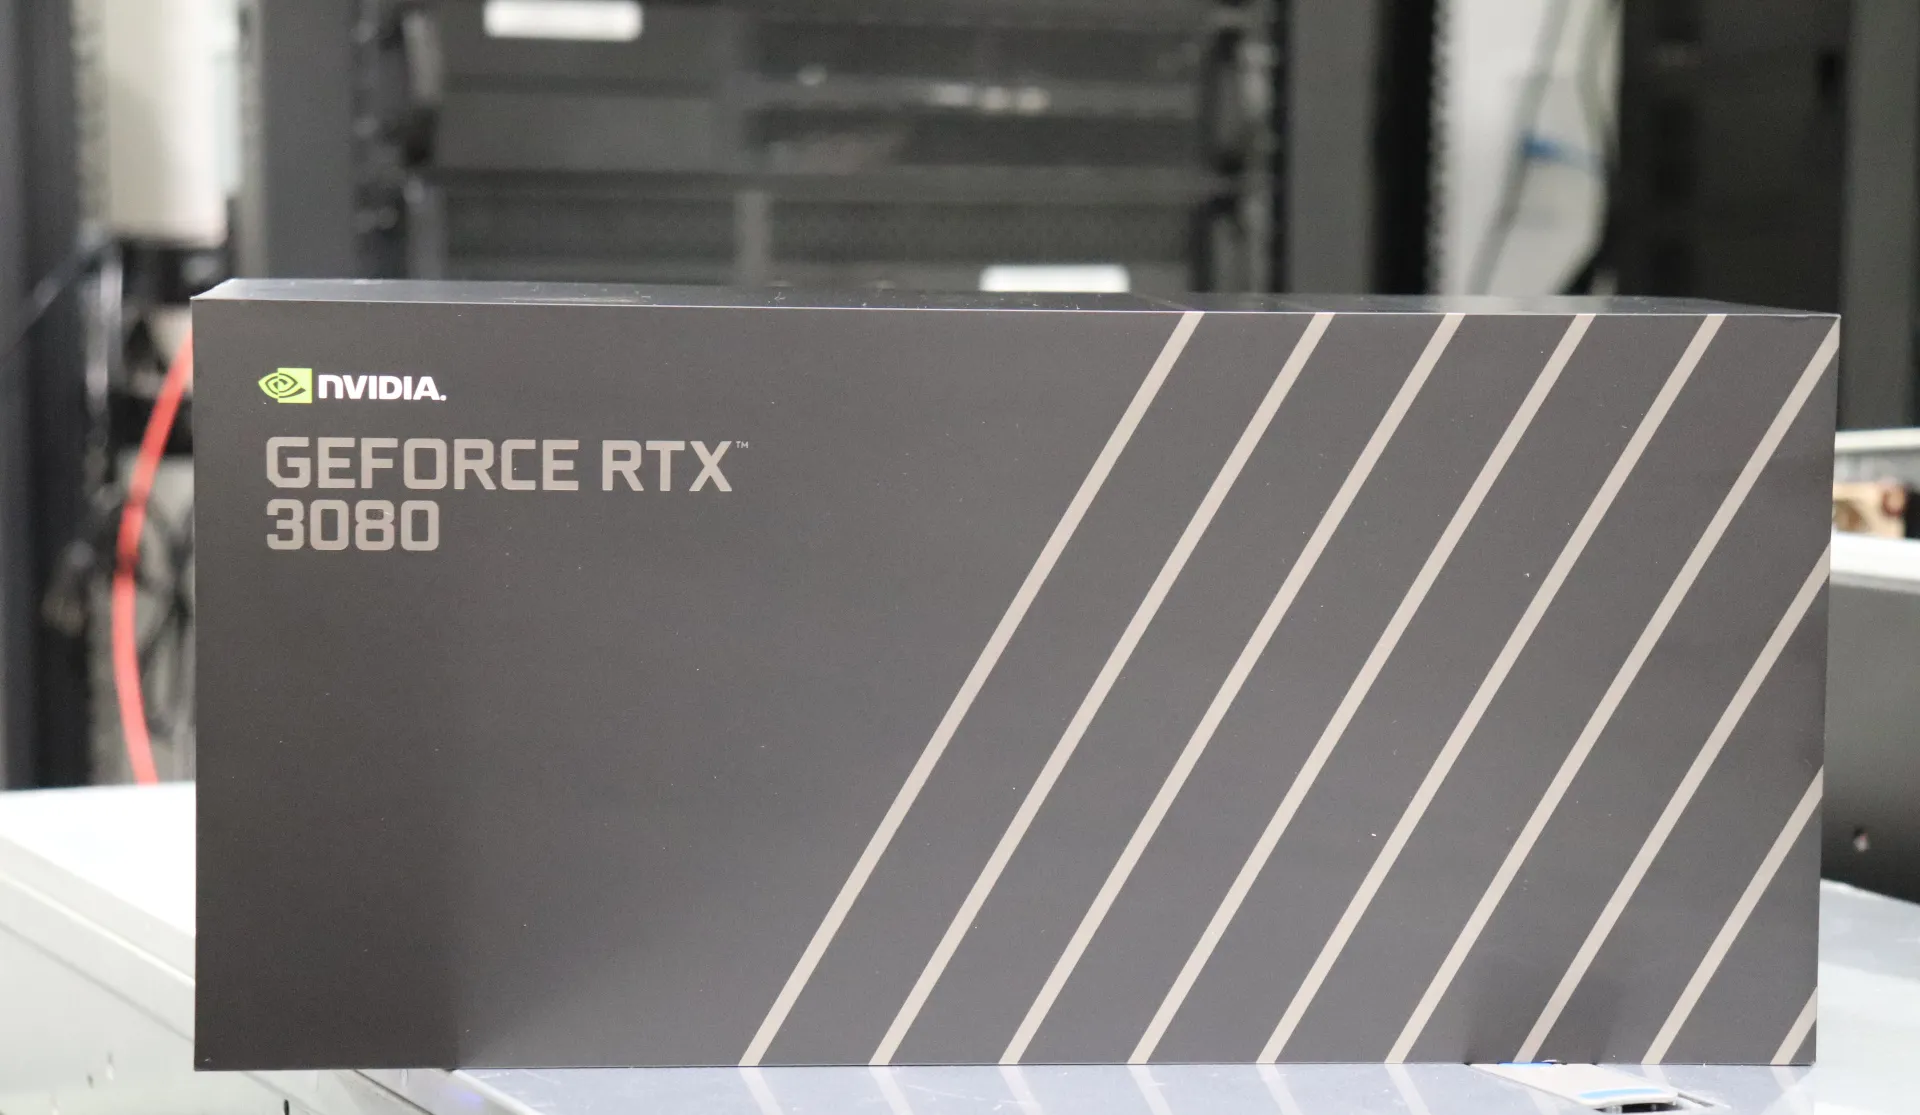 NVIDIA GeForce GT 710: Trying NVIDIA's Newest Sub-$50 GPU On Linux Review -  Phoronix